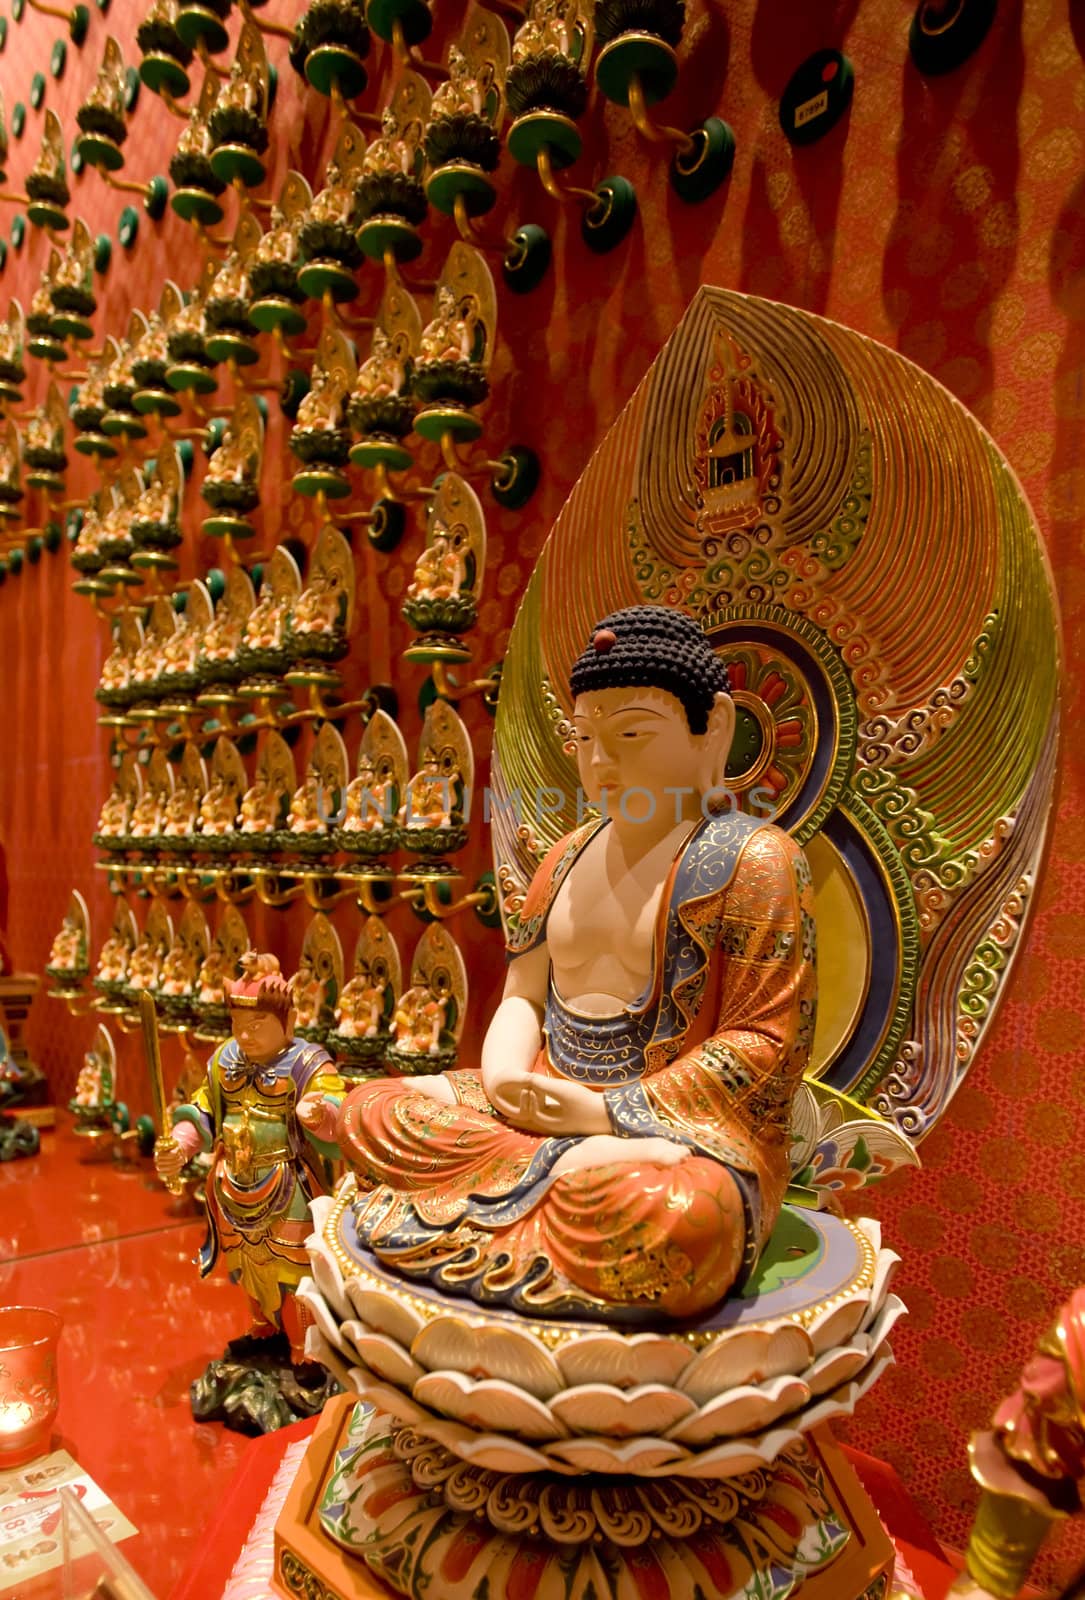 A statue of buddha in a buddhist temple